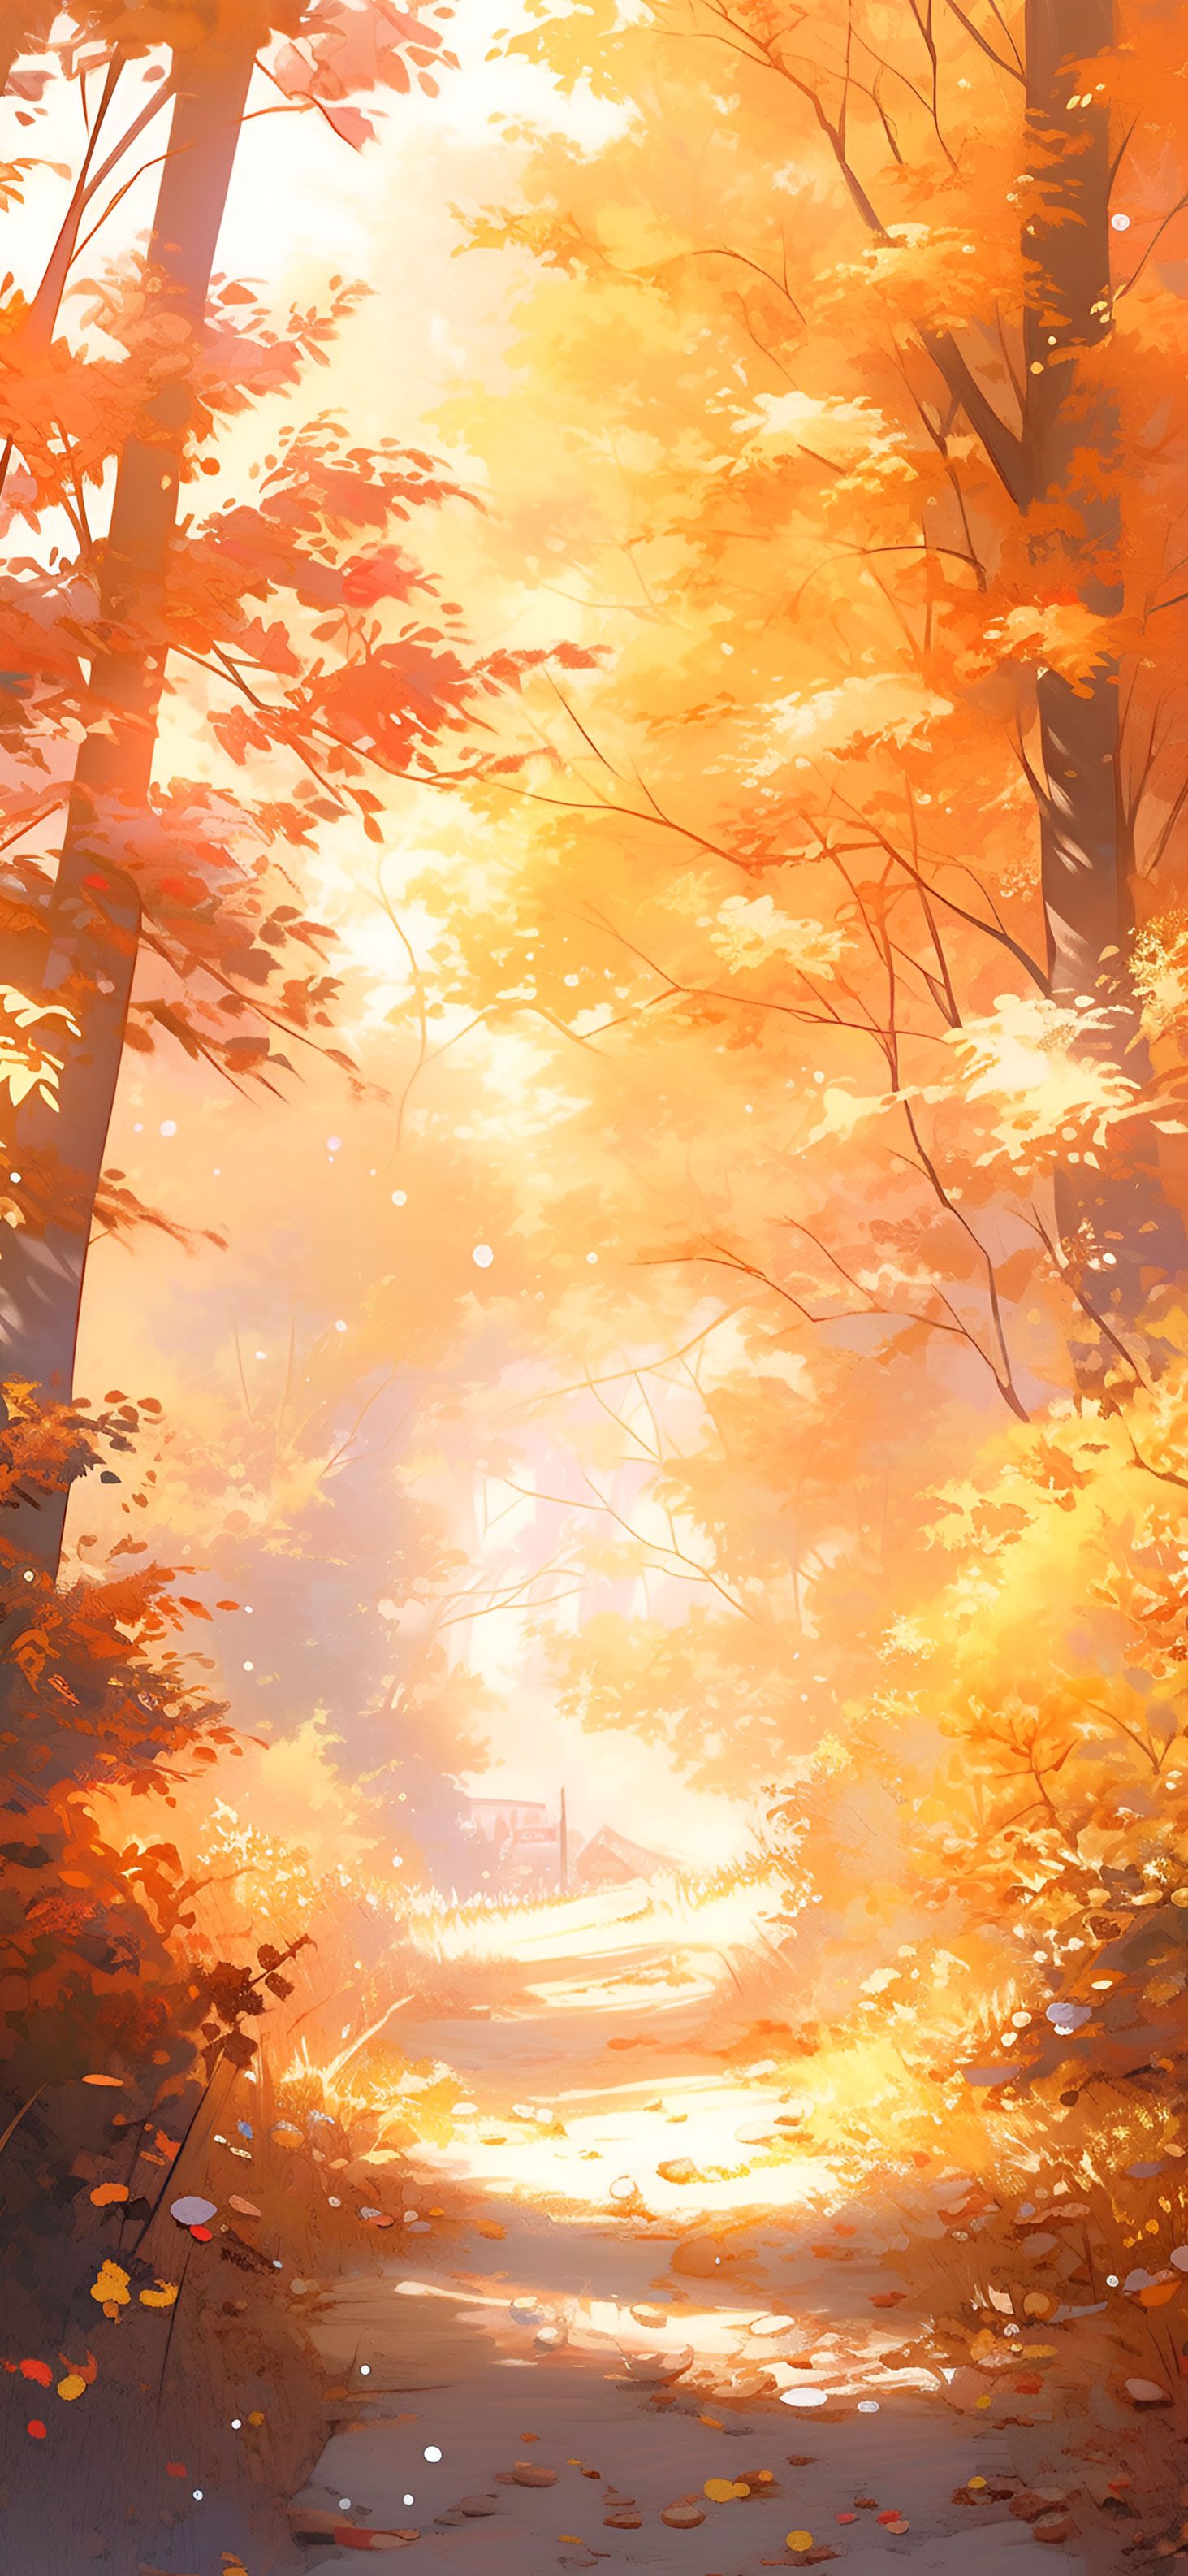 Sunny Autumn Forest Aesthetic Wallpaper Wallpaper iPhone